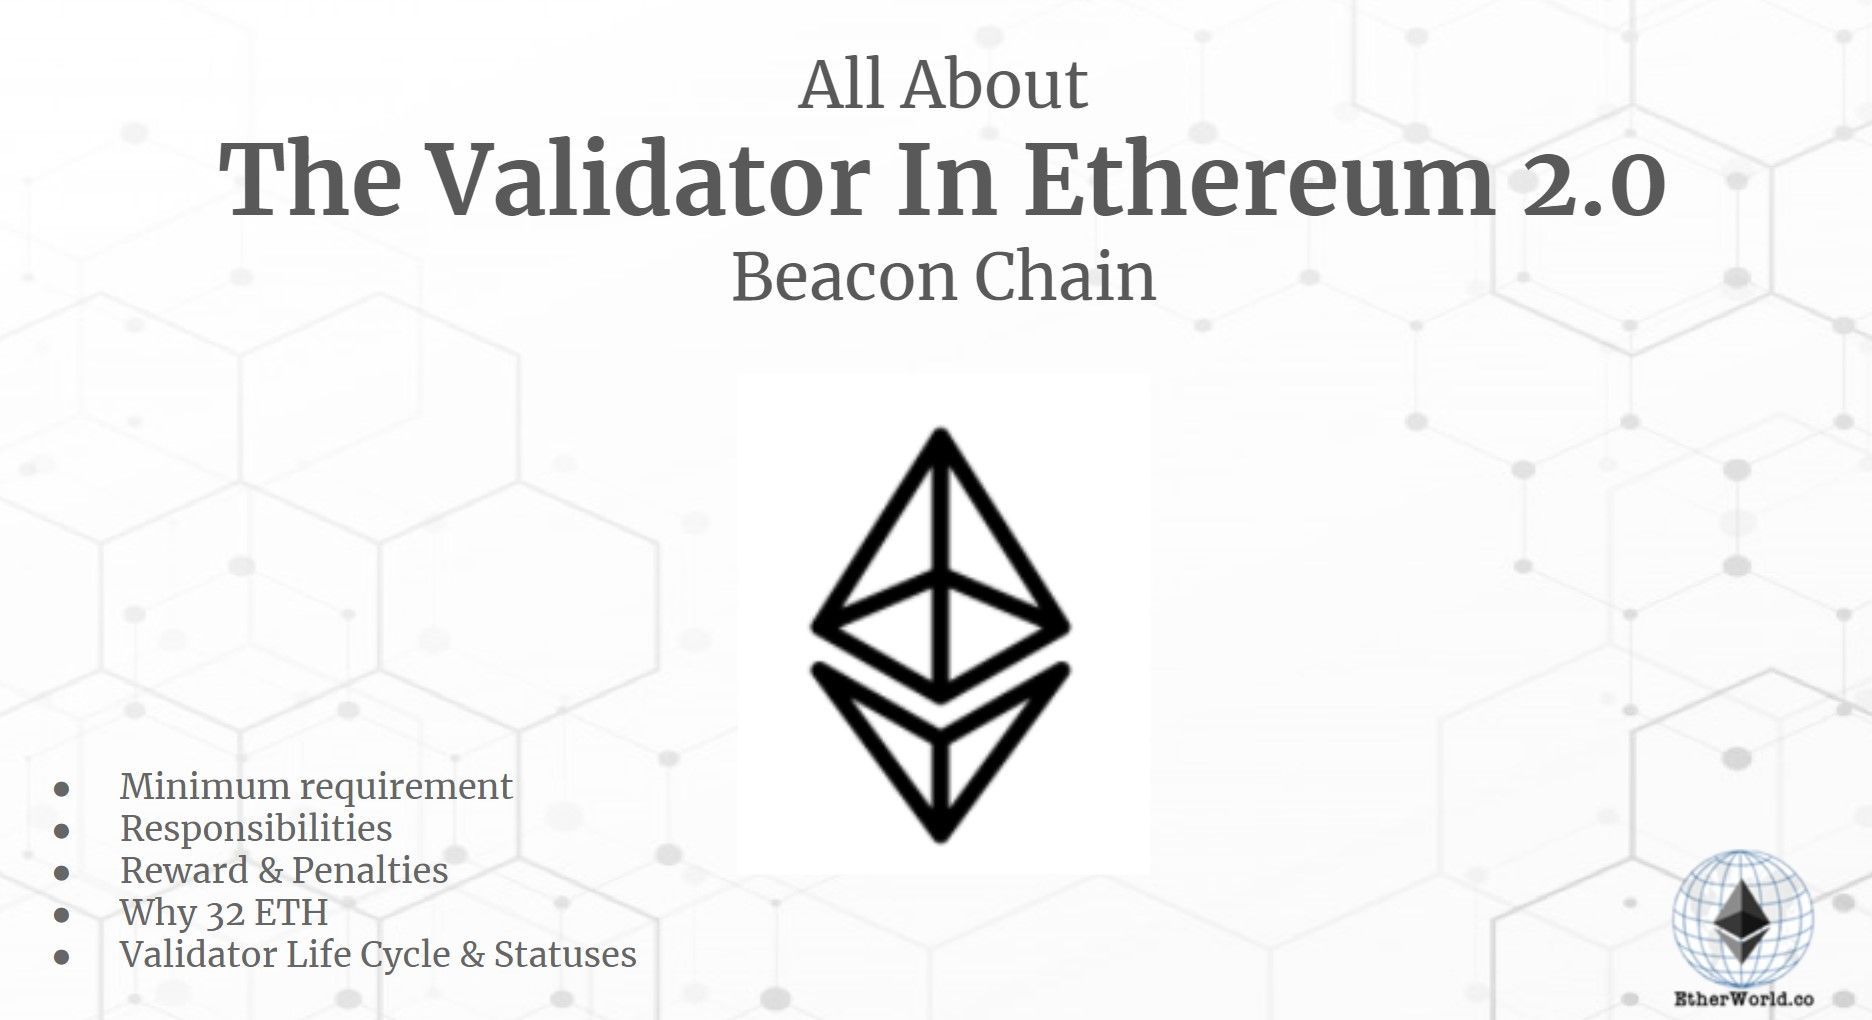 All About The Validator In Ethereum 2.0 Beacon Chain